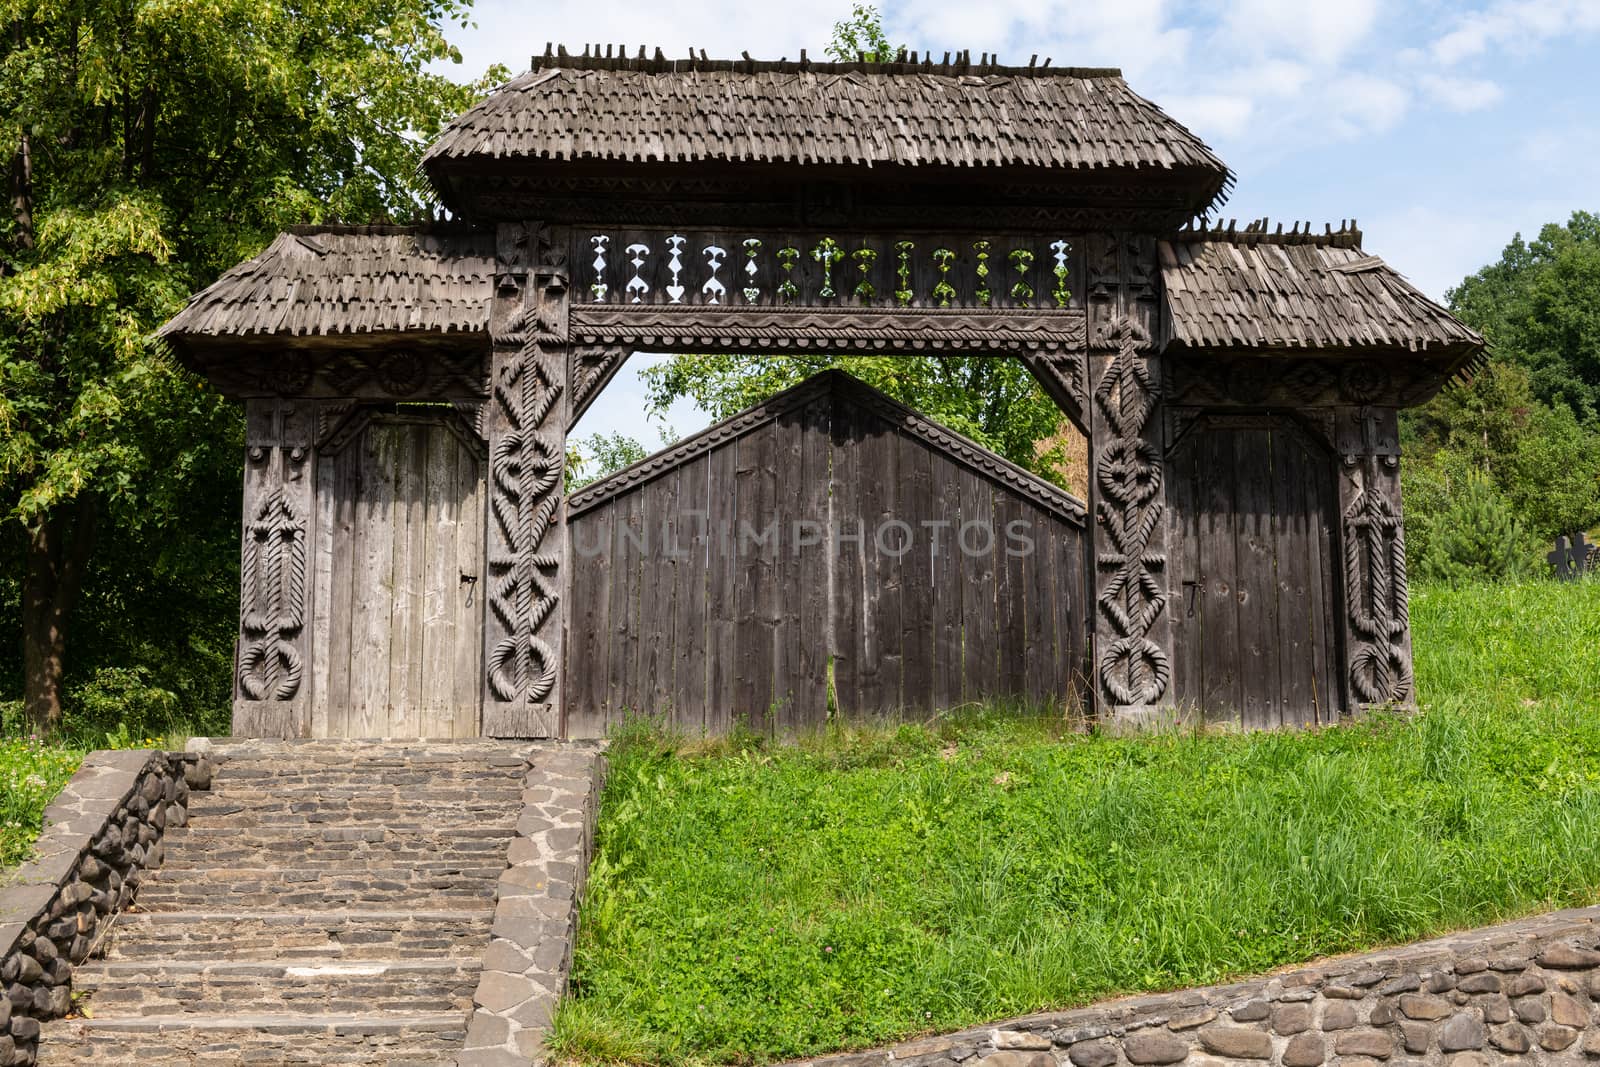 Barsana Monastery Architectural Detail - Traditional Wooden Carved Gate (Maramures, Romania).